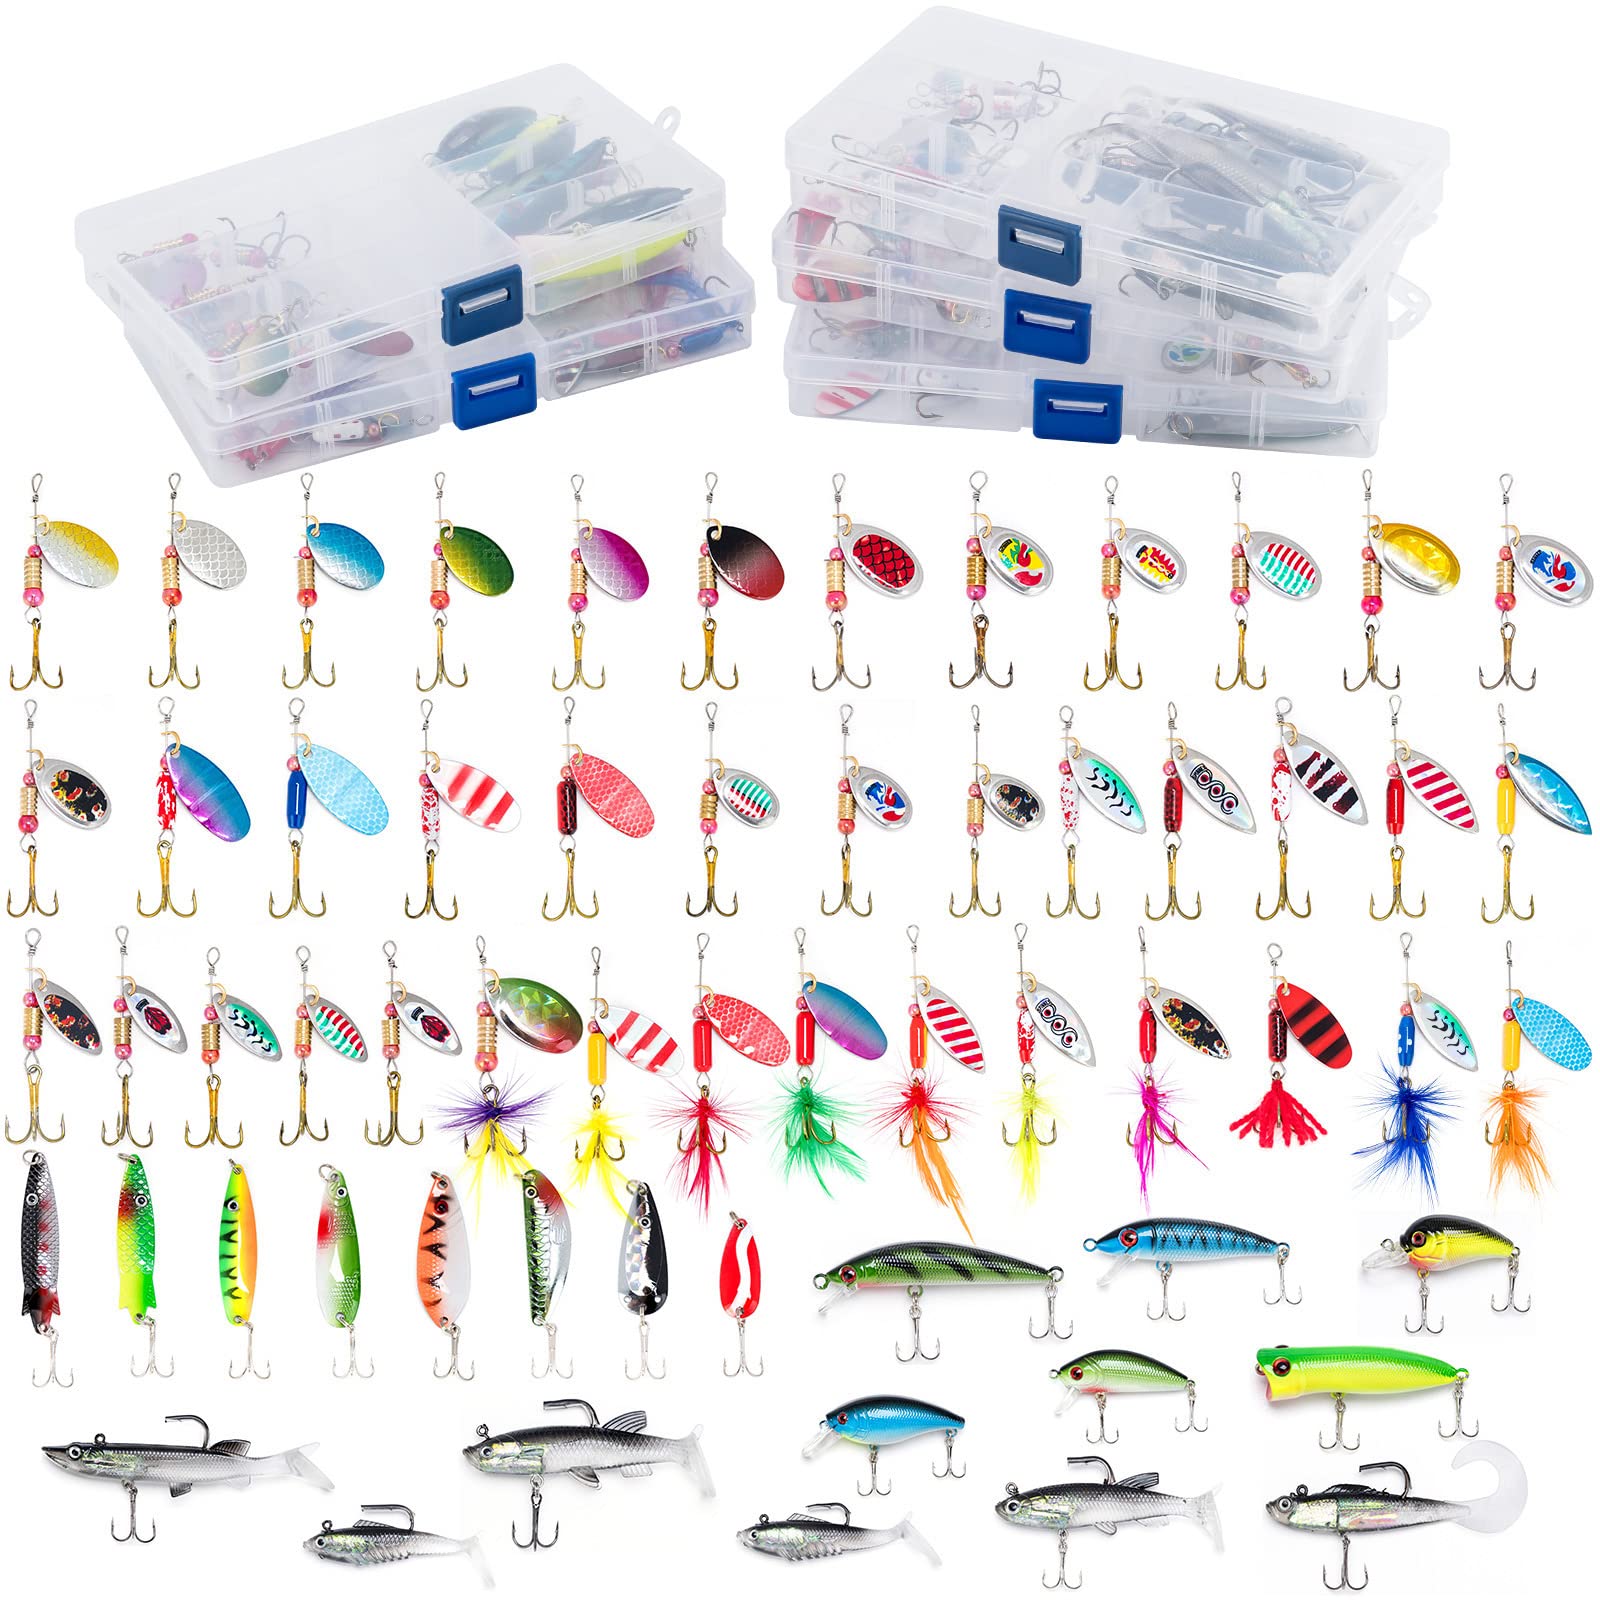 Dr.Fish 60 Pieces Fishing Lures, 5 Tackle Box with Tackle Included